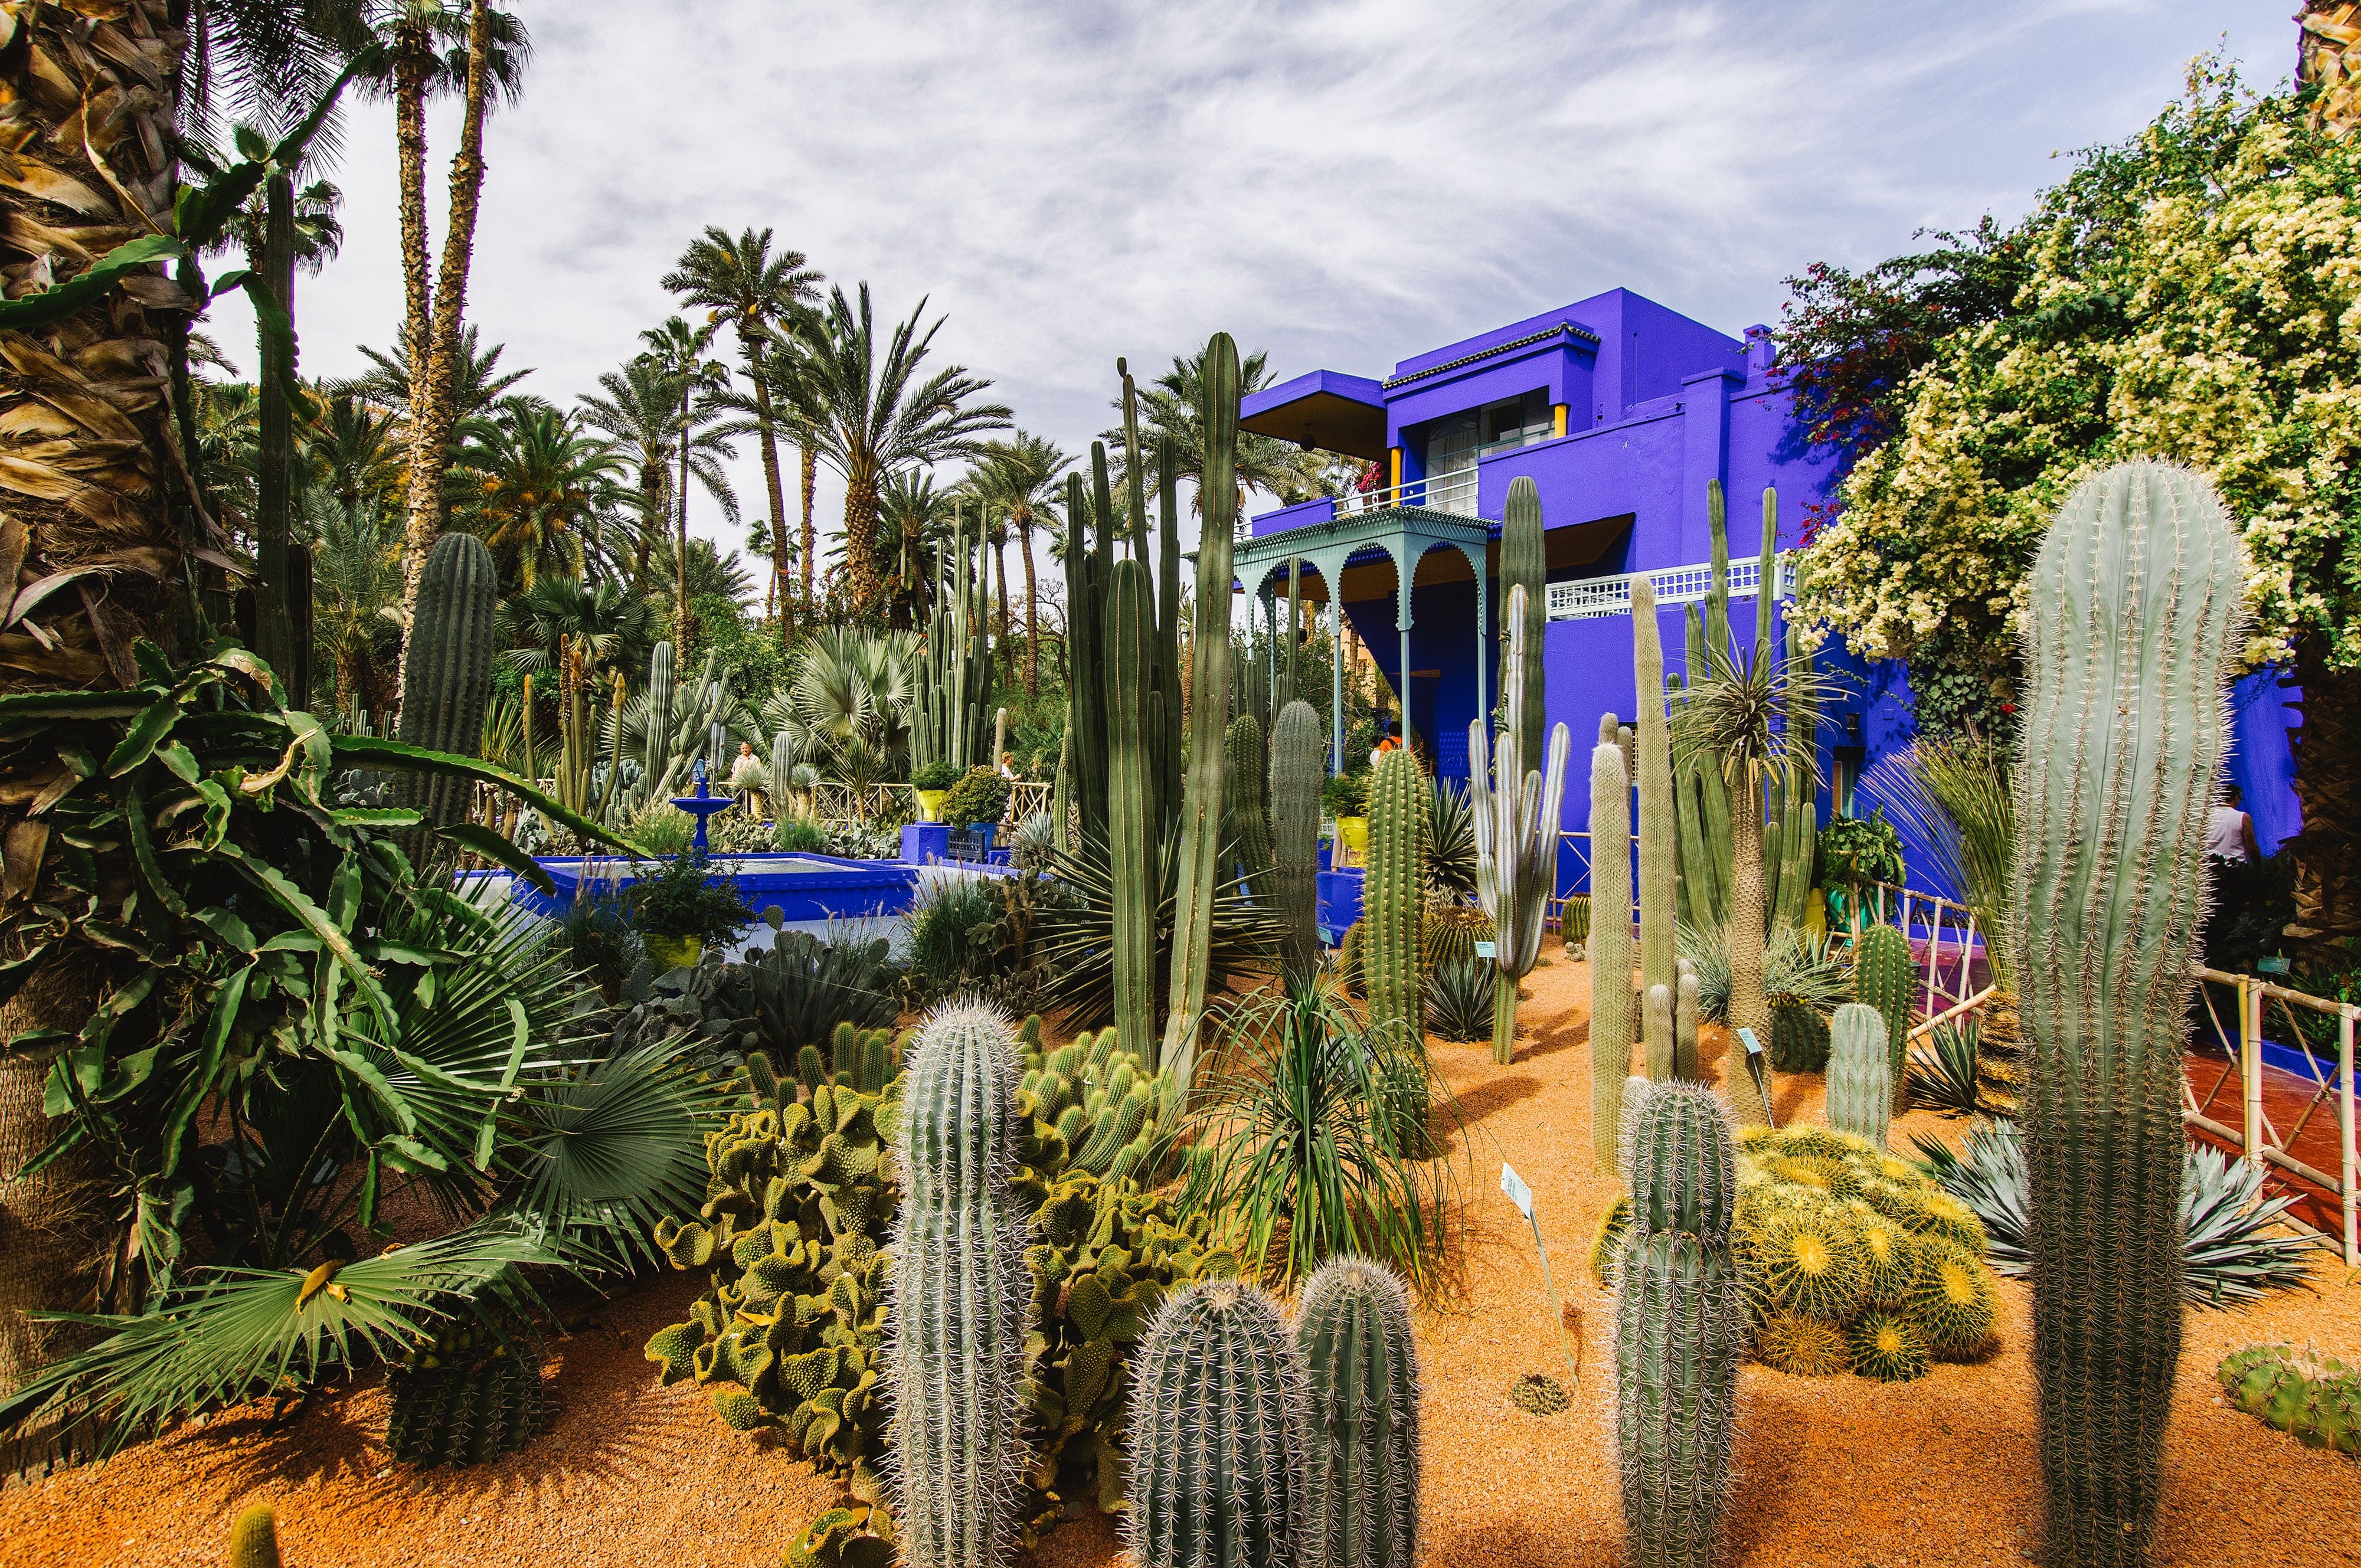 Cactus plants in Jardin Majorelle with the bold purple walls of the house in the background